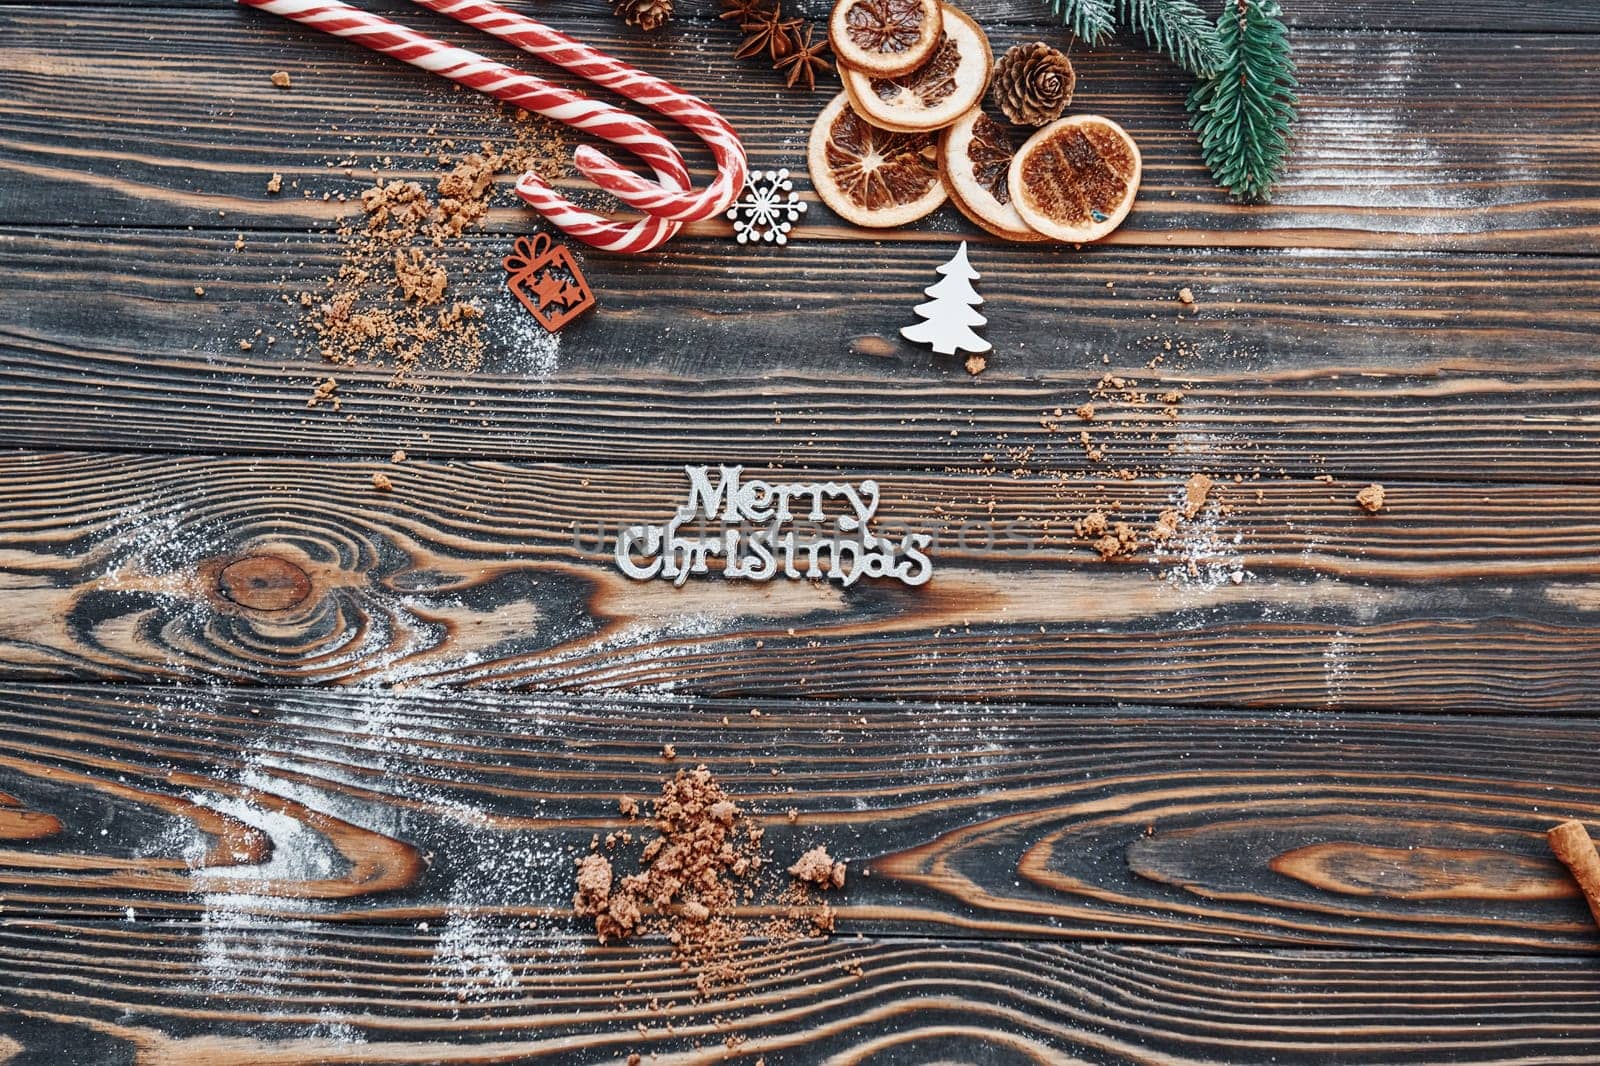 Candies and slices of oranges. Christmas background with holiday decoration by Standret